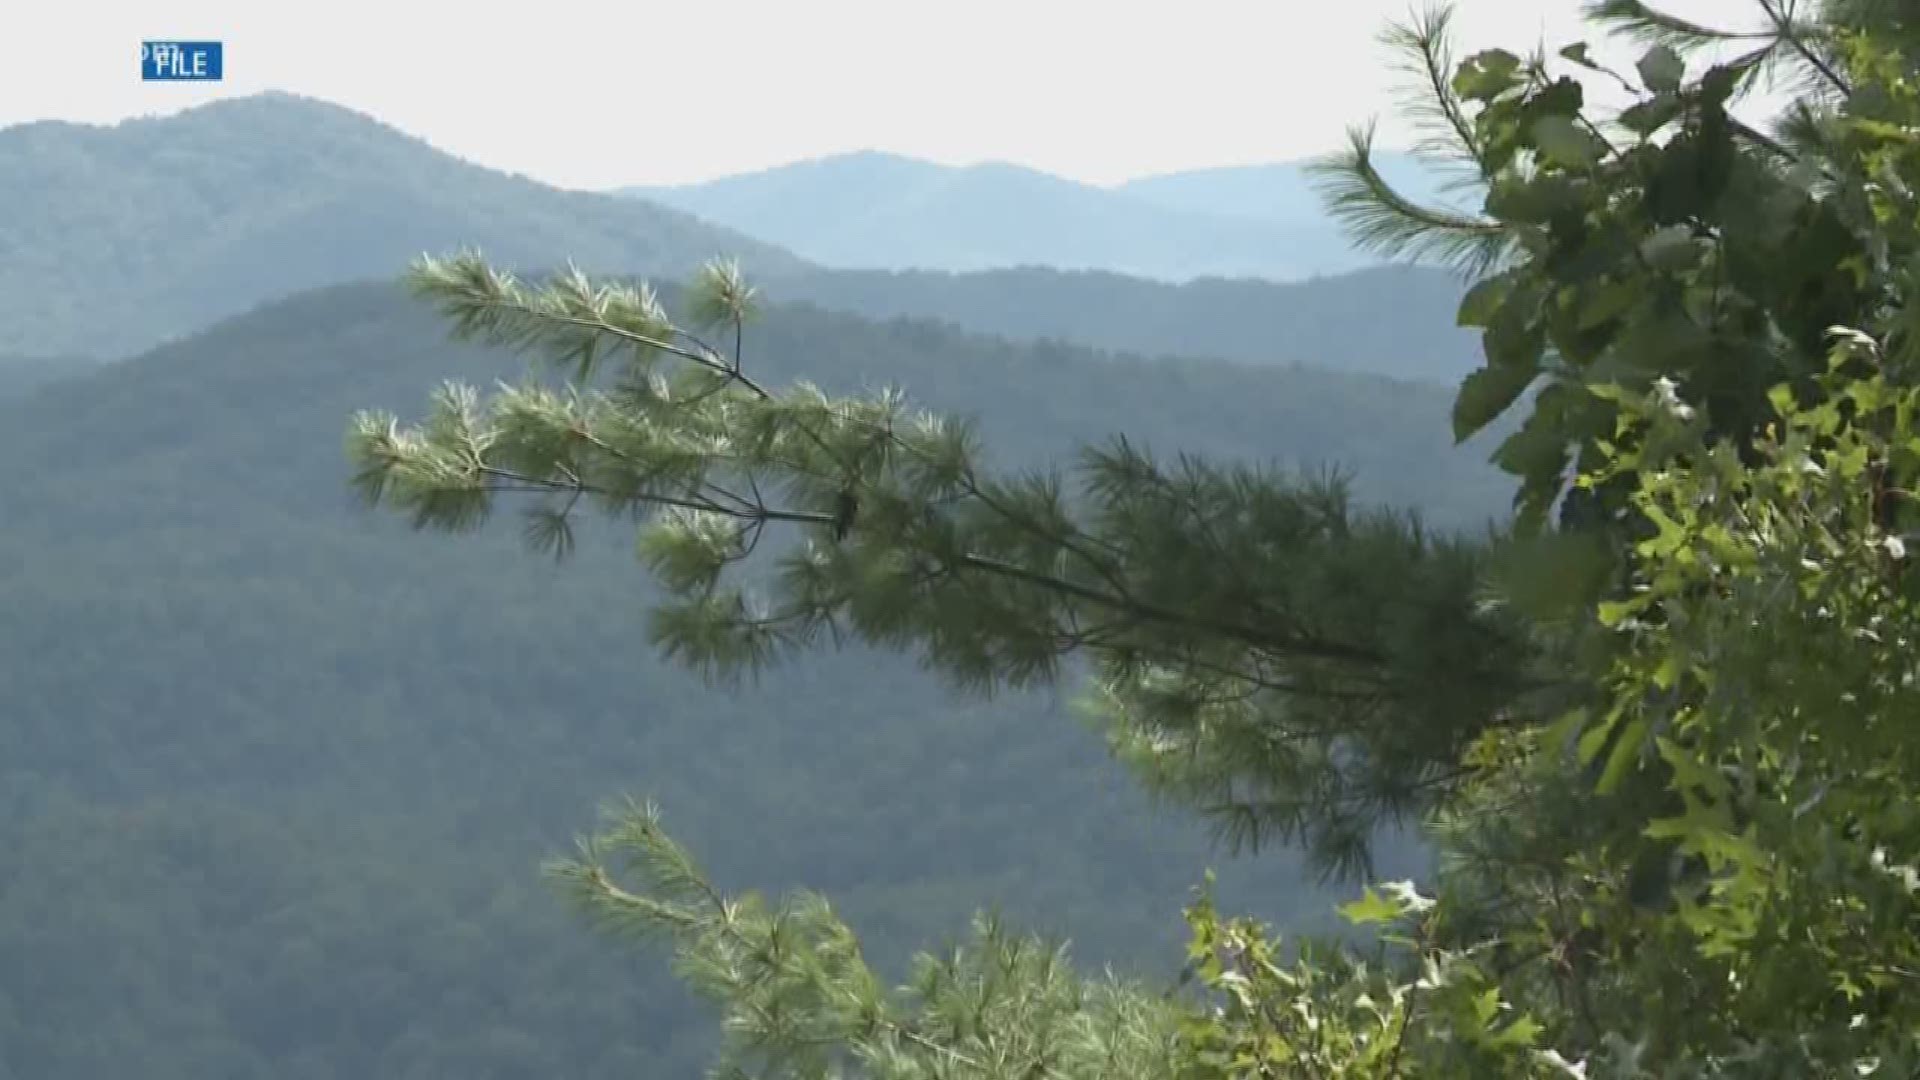 100,000 acres of working forest land will now be preserved along the Tennessee/Kentucky state line.